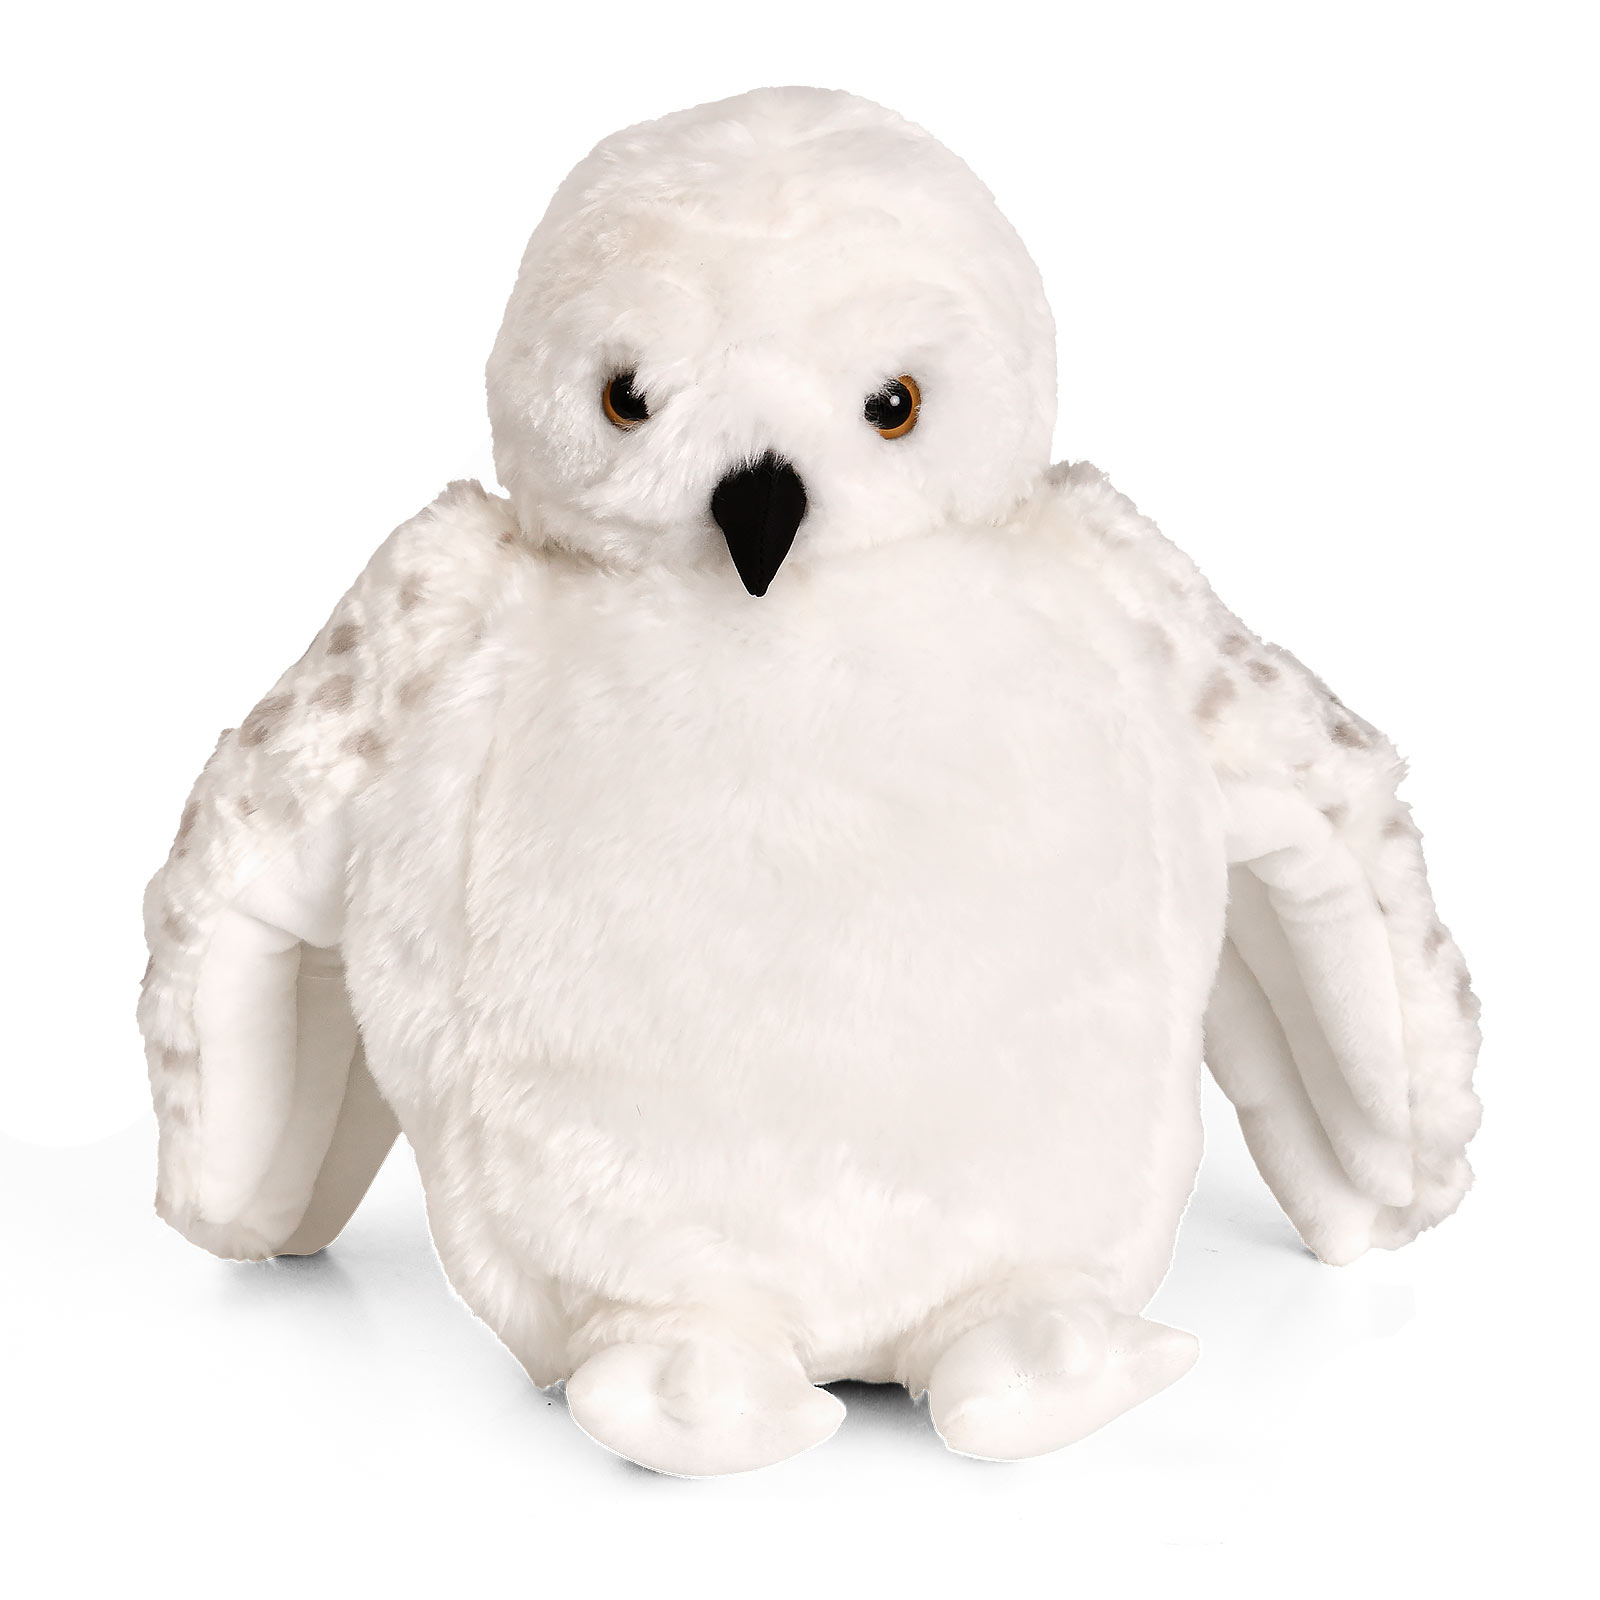 Harry Potter - Hedwig Plush Figure with Sound 28 cm